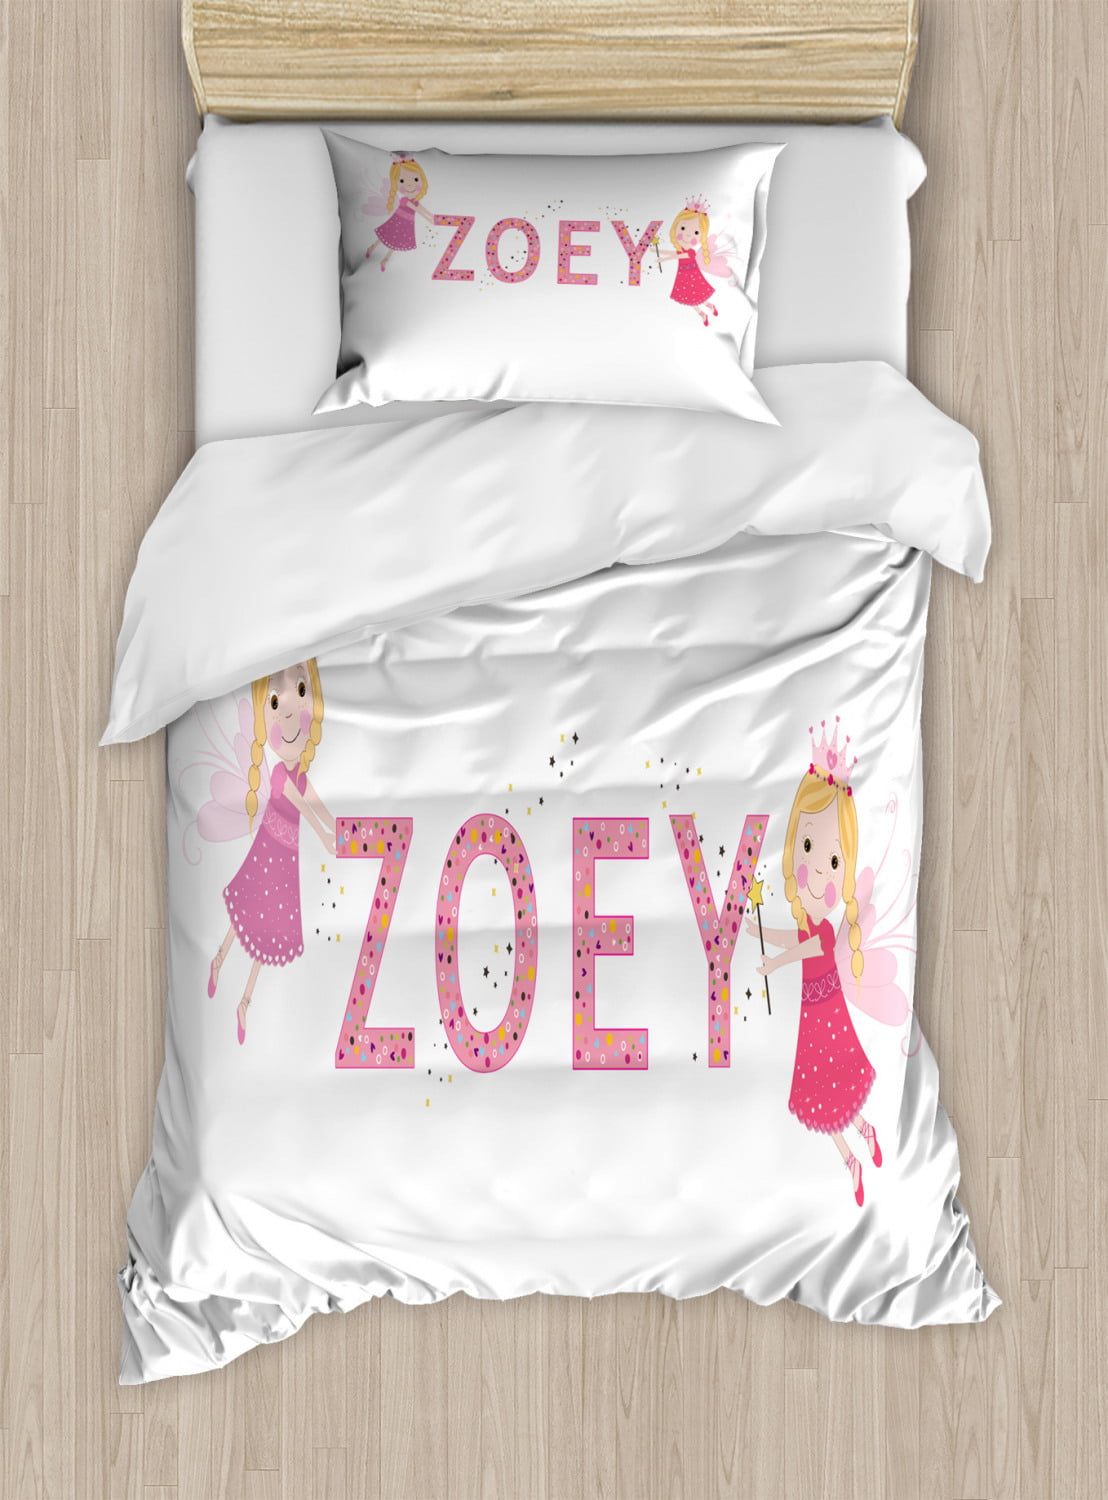 Zoey Duvet Cover Set Twin Size, Alphabet Twin Bed Sheets